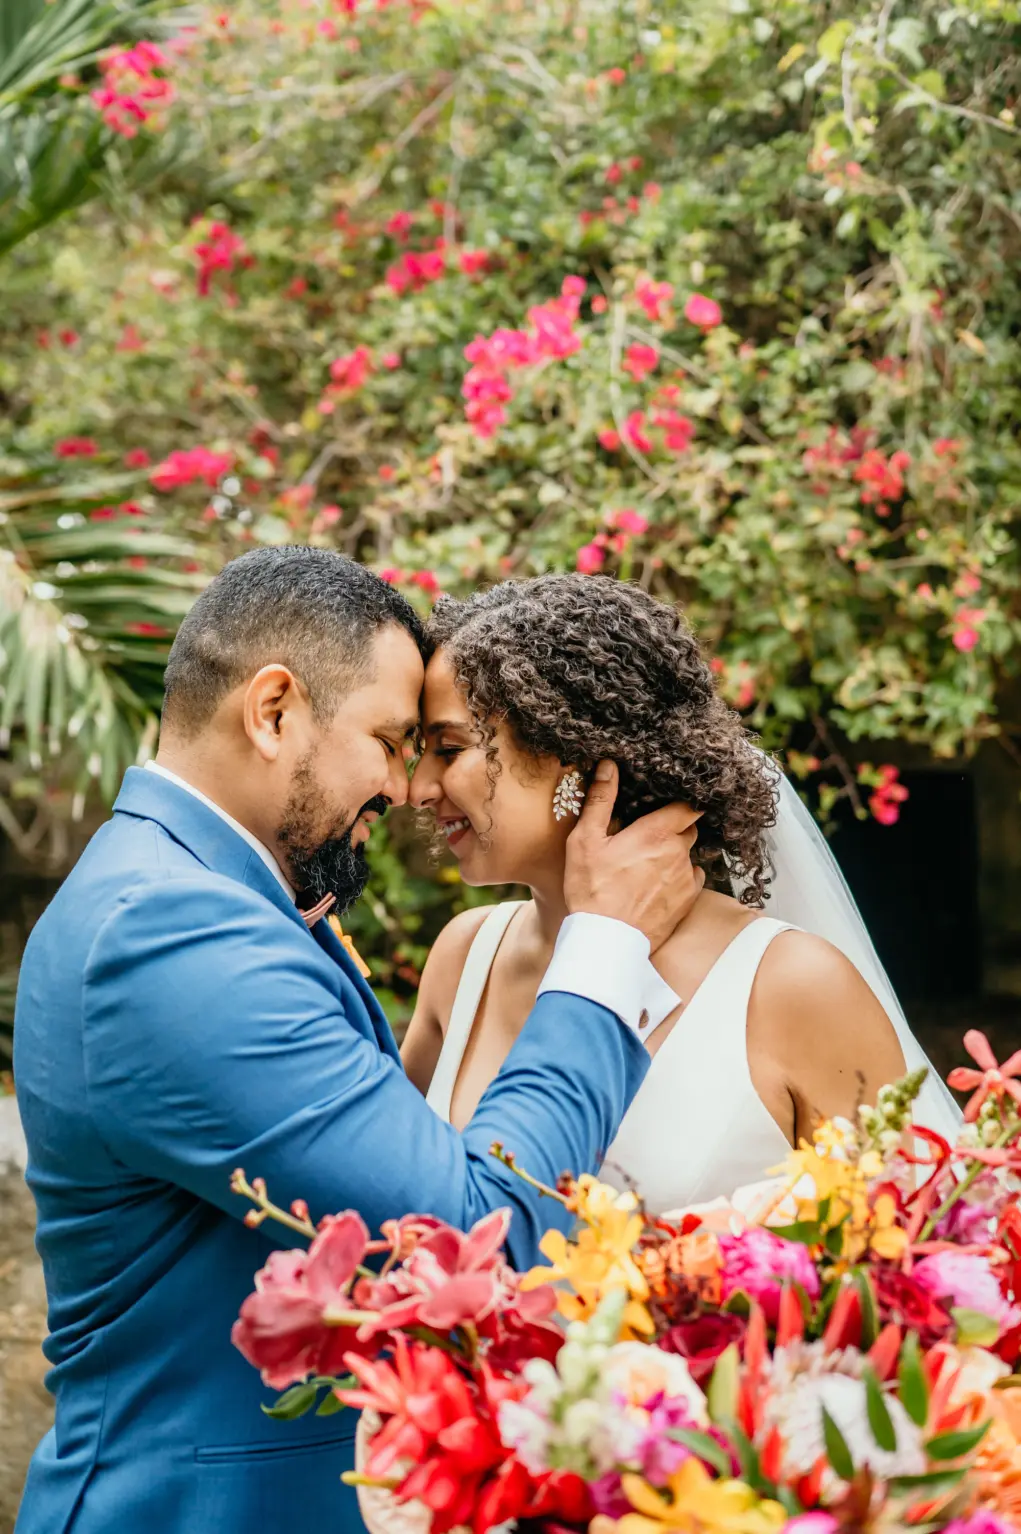 Bride and Groom Just Married Wedding Portrait | Tropical Bridal Bouquet with Red King Protea, Orange Pincushion Protea, Pink Roses, Orchids, and Palm Leaves | St Pete Florist Save The Date Florida